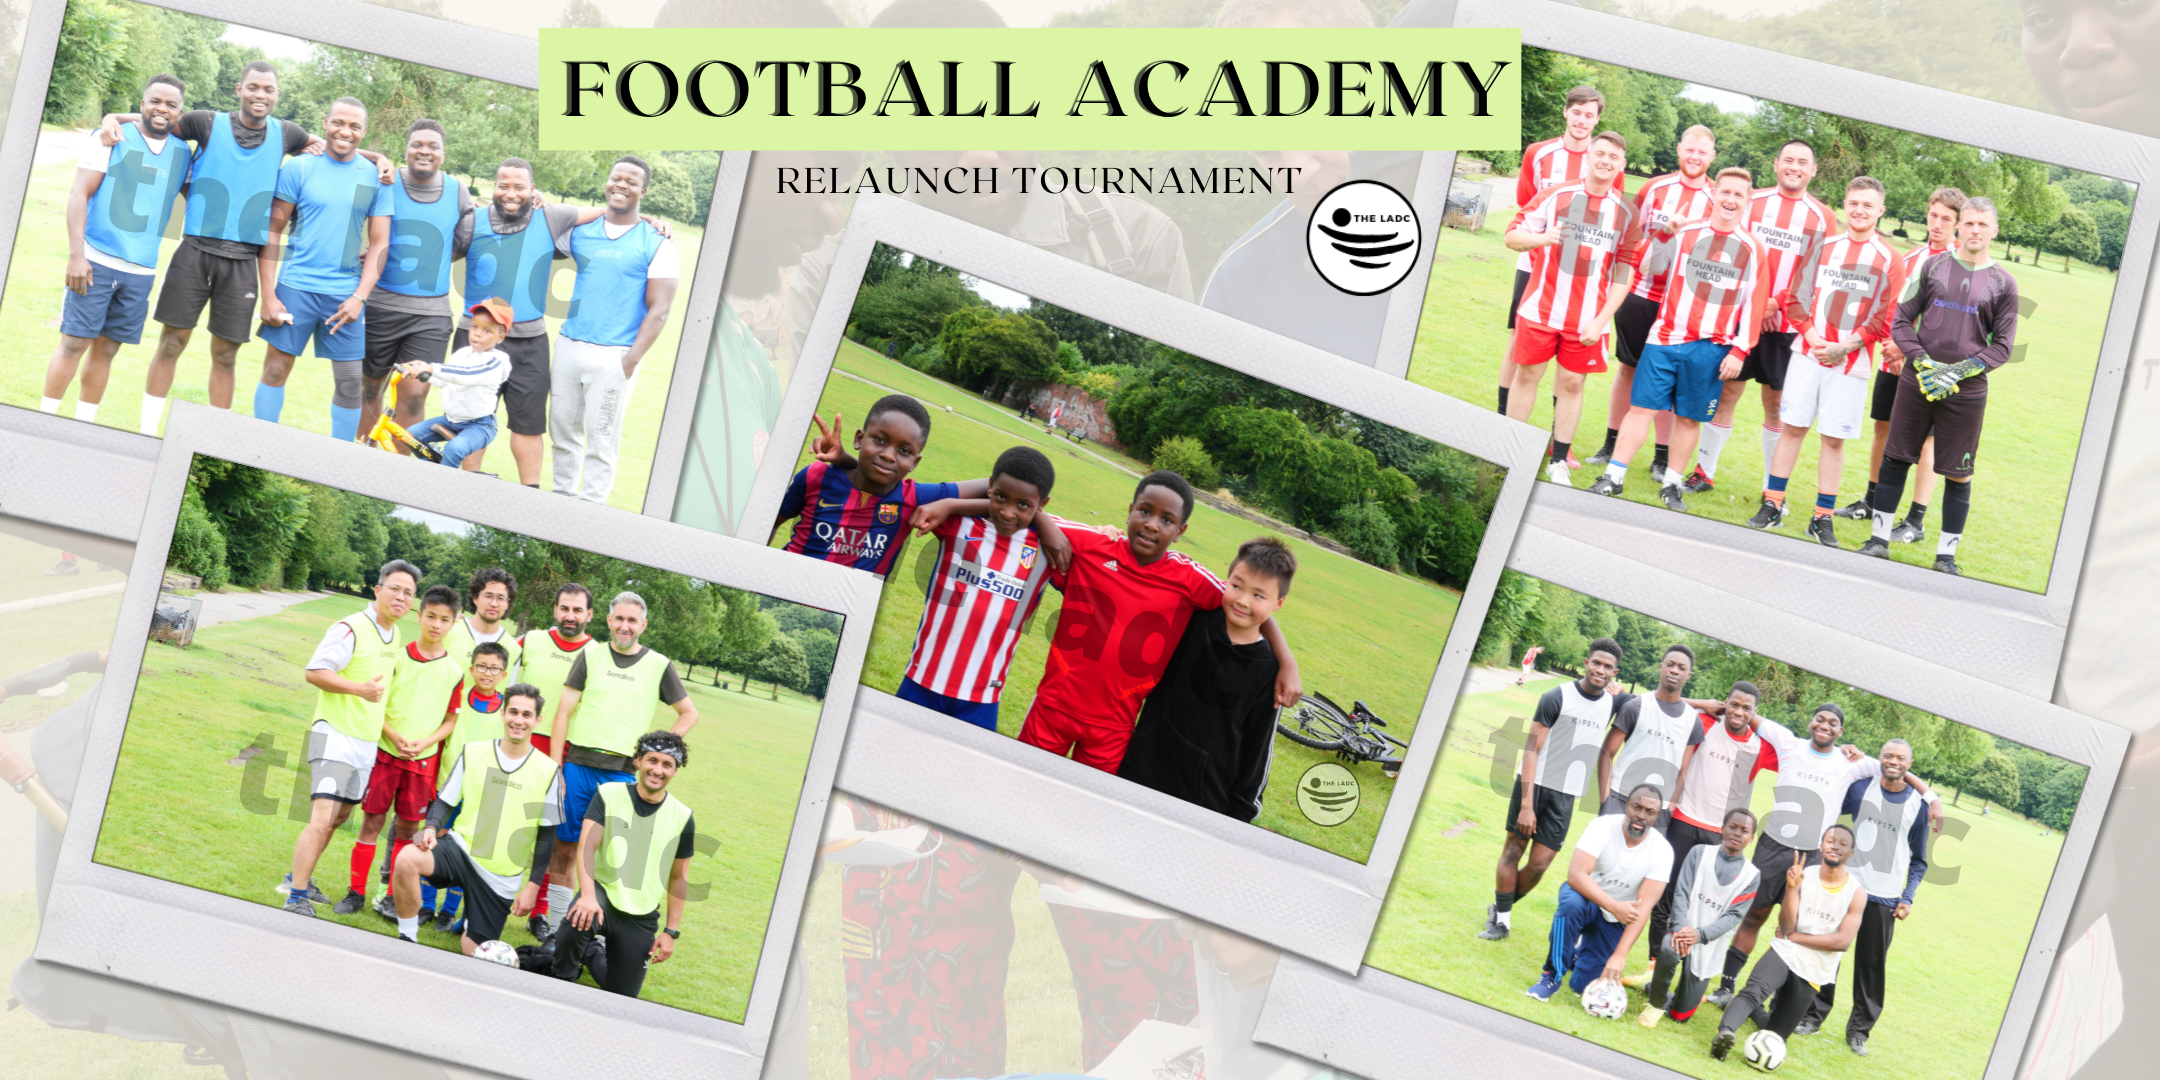 LADC Football Academy ReLaunch